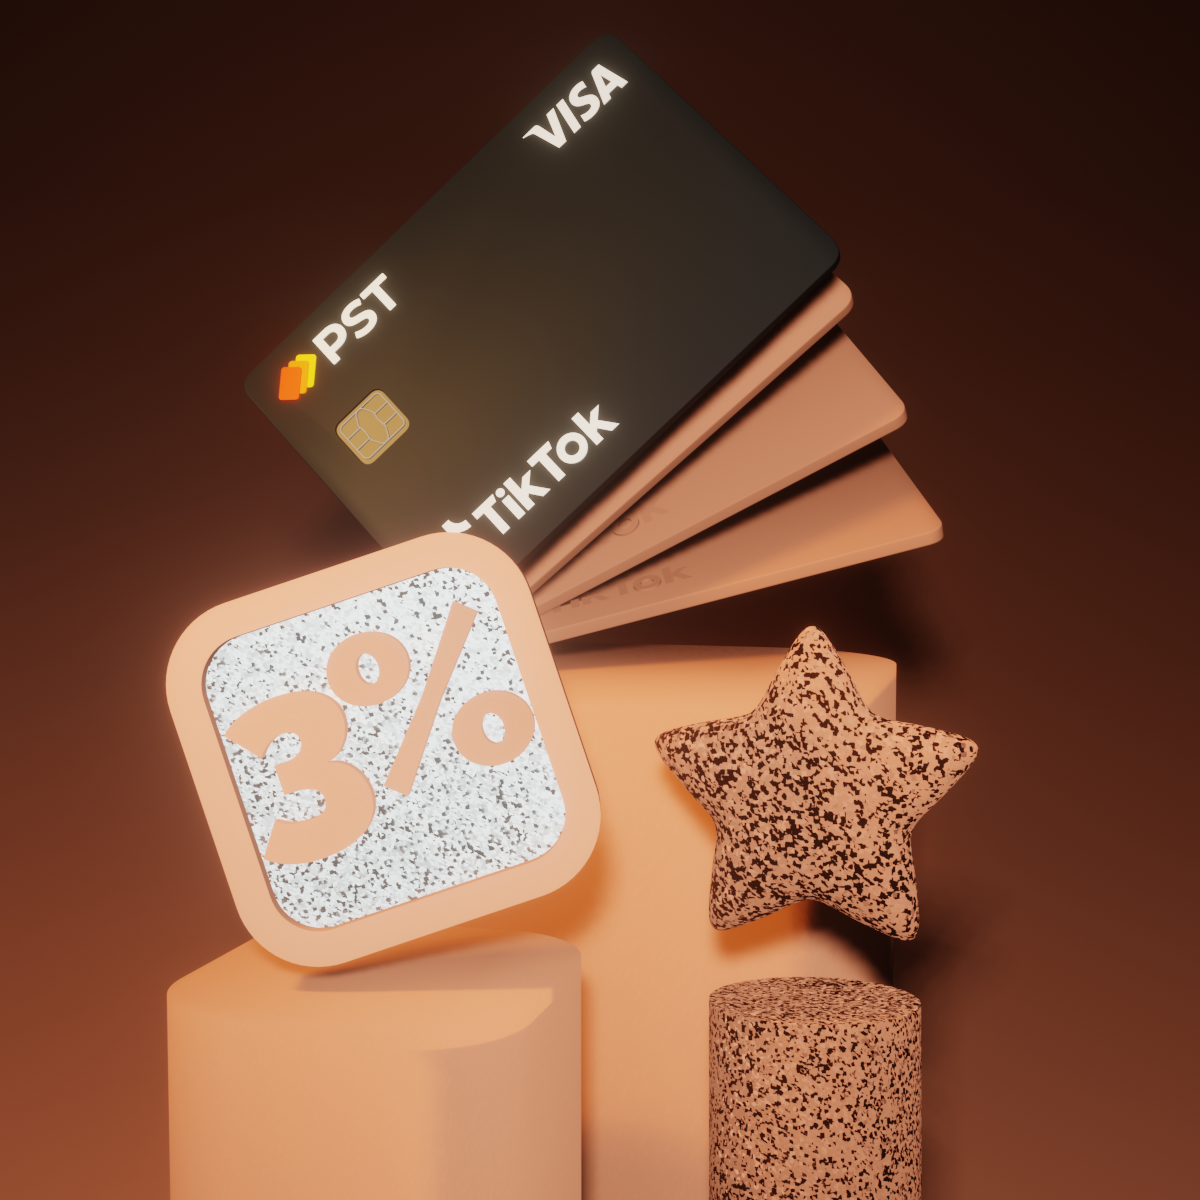 How (and why) do payment services afford cashback? And how to get yours at PSTNET